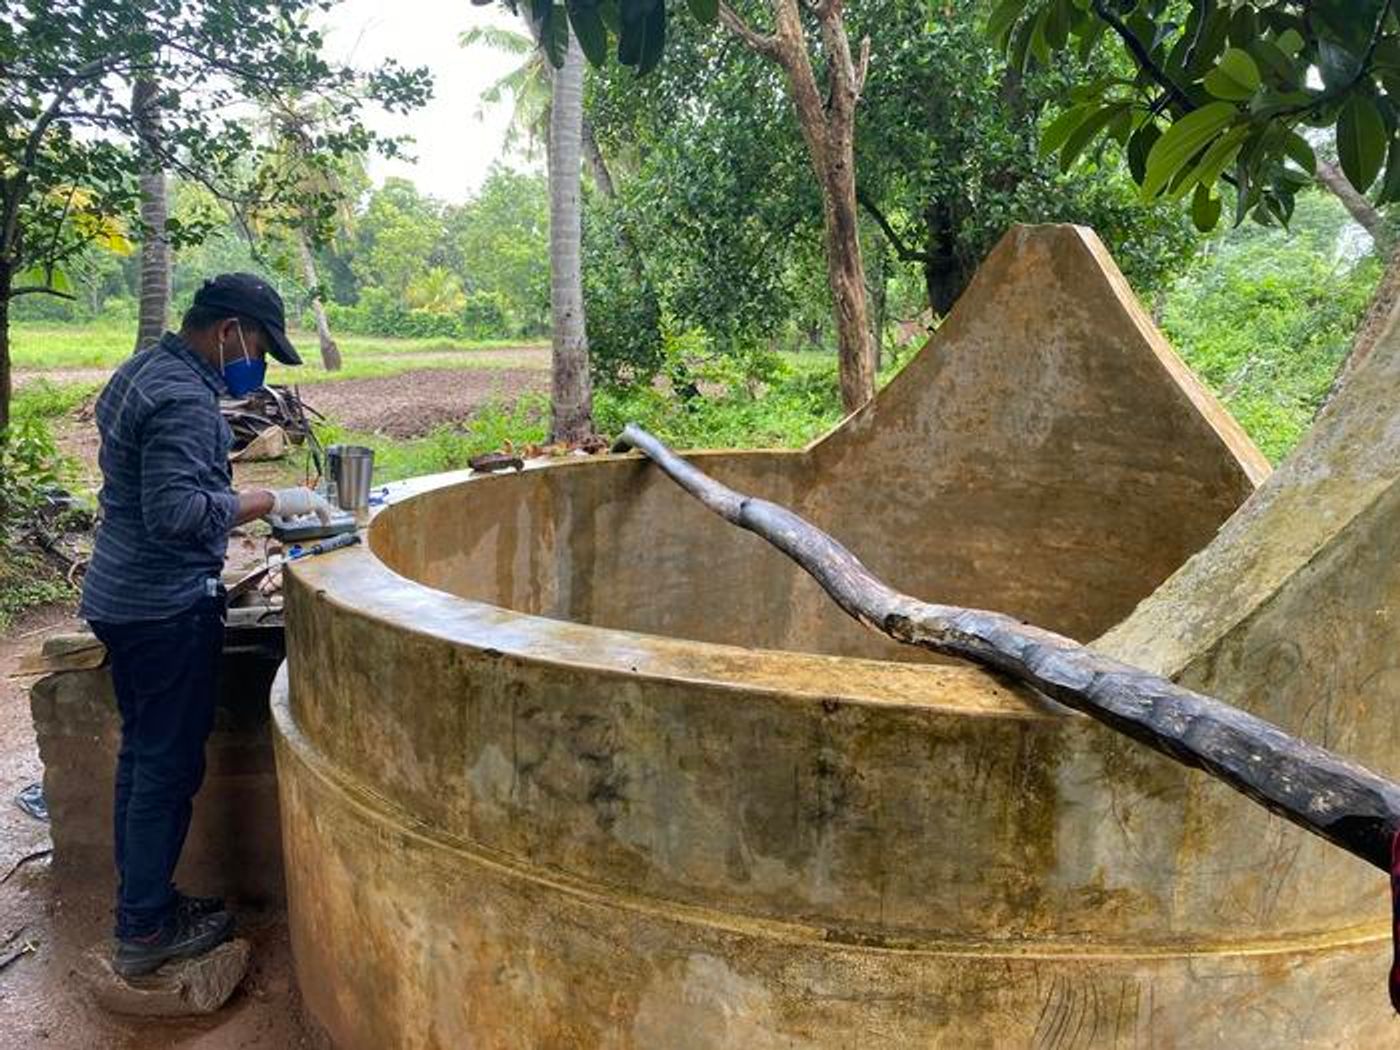 A researcher takes samples of well water in a rural community of Sri Lanka. Tests indicate that the active ingredient in Roundup may be interacting with the area's hard water to cause epidemic levels of chronic kidney disease. / Credit: Jake Ulrich, Duke University